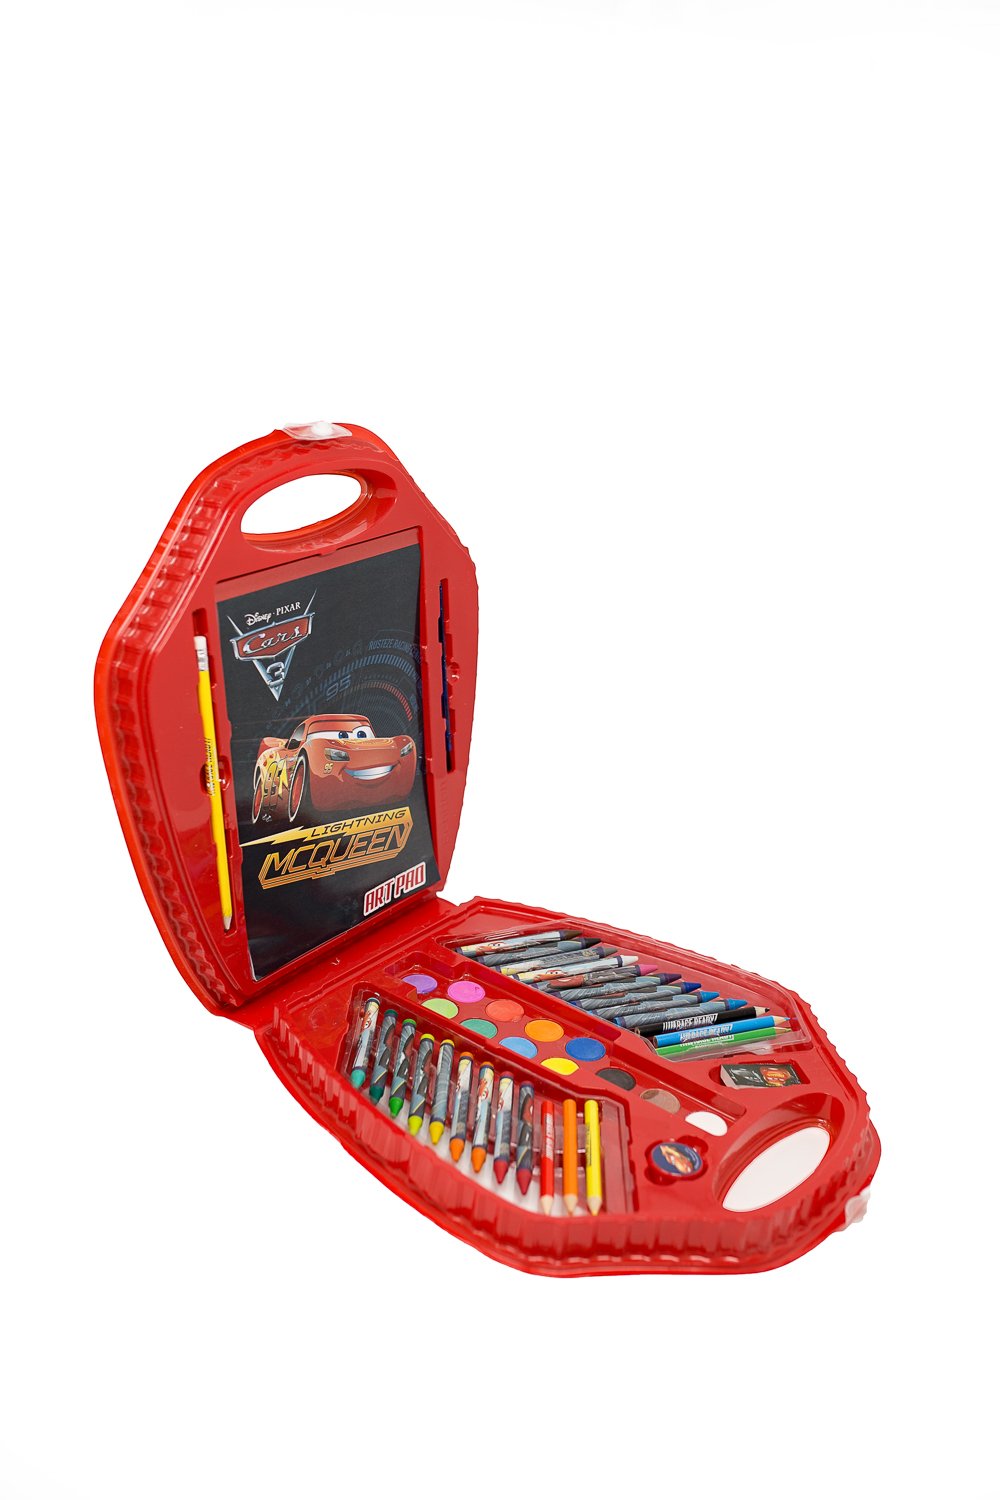 Bendon Cars 3 Art Supplies with Large Art Storage Case (AS40635)